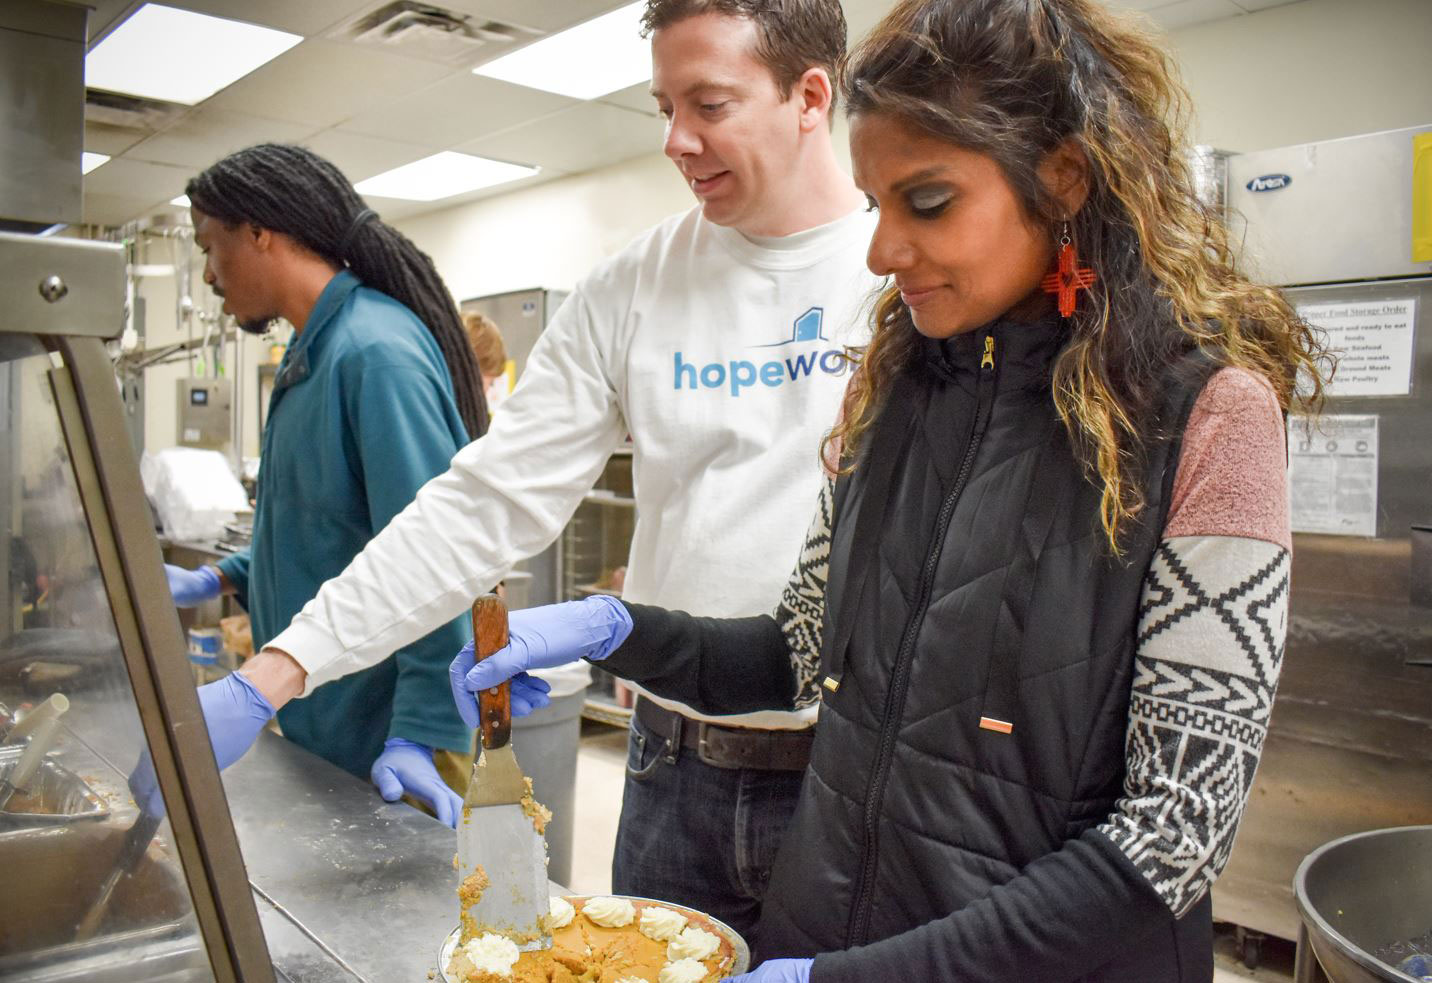 HopeWorks CEO, Annam Manthiram serving a meal to clients.